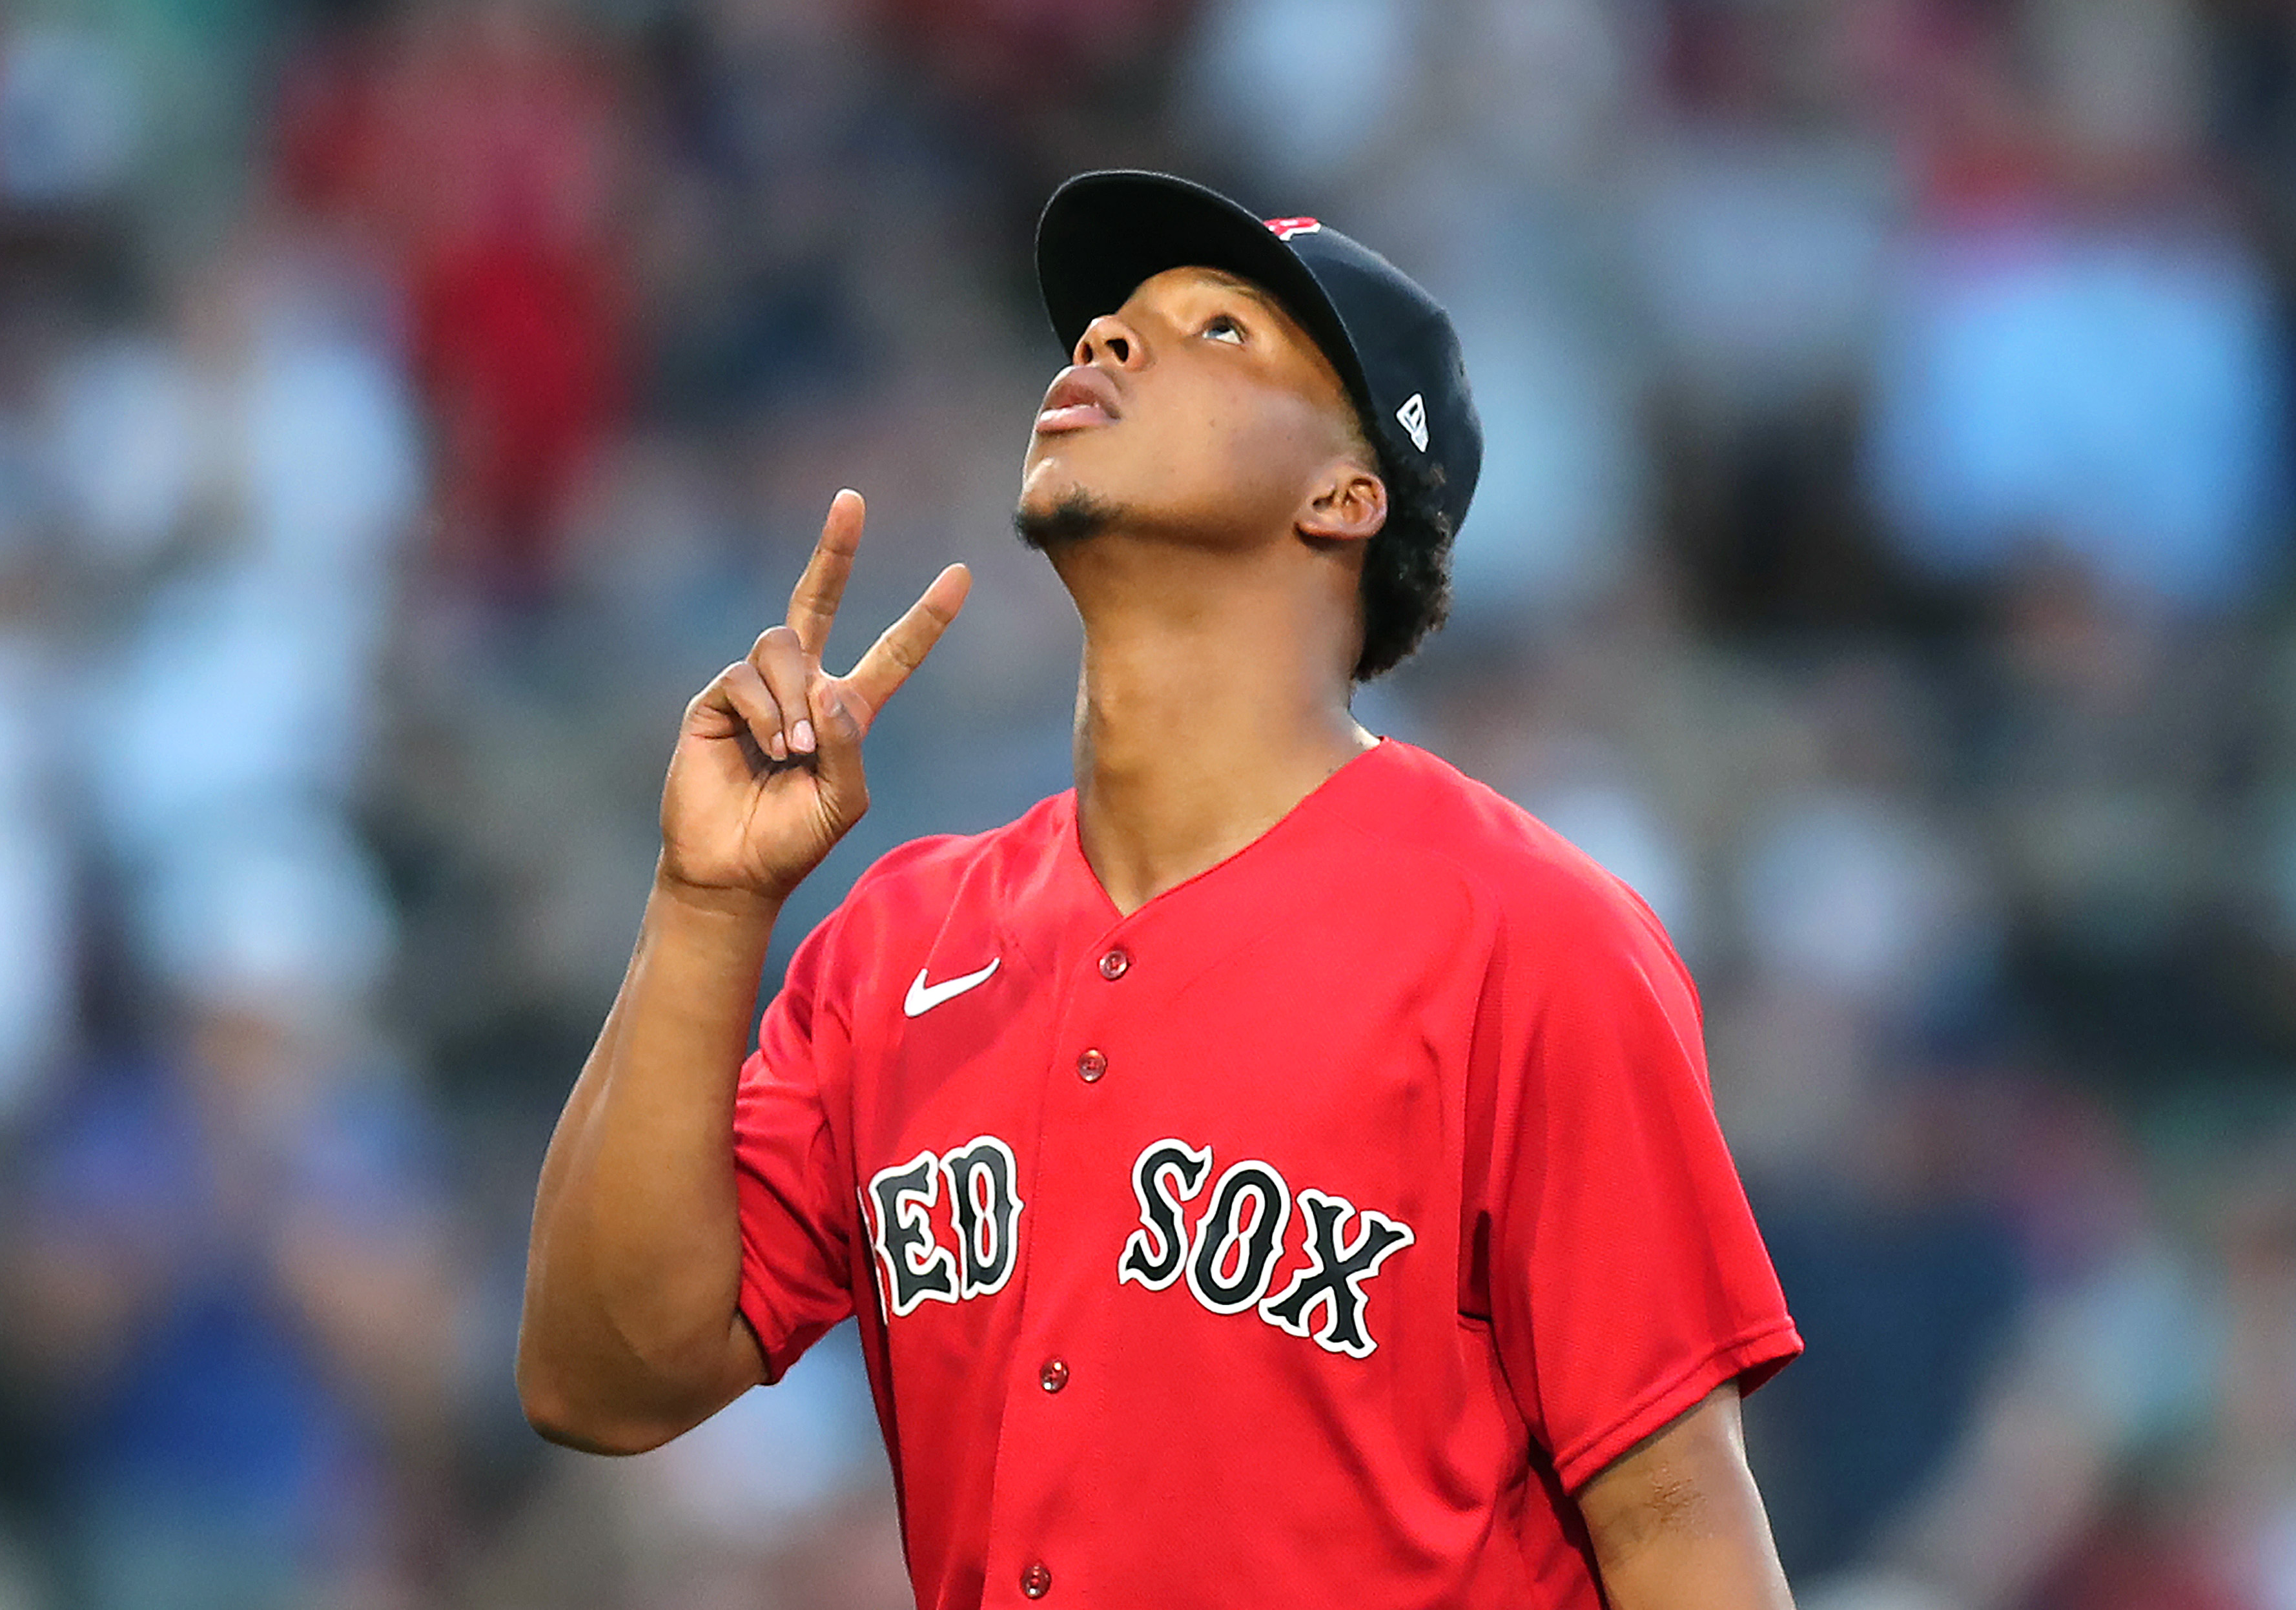 Bello's struggles continue, bats fall silent as Red Sox lose 6-2